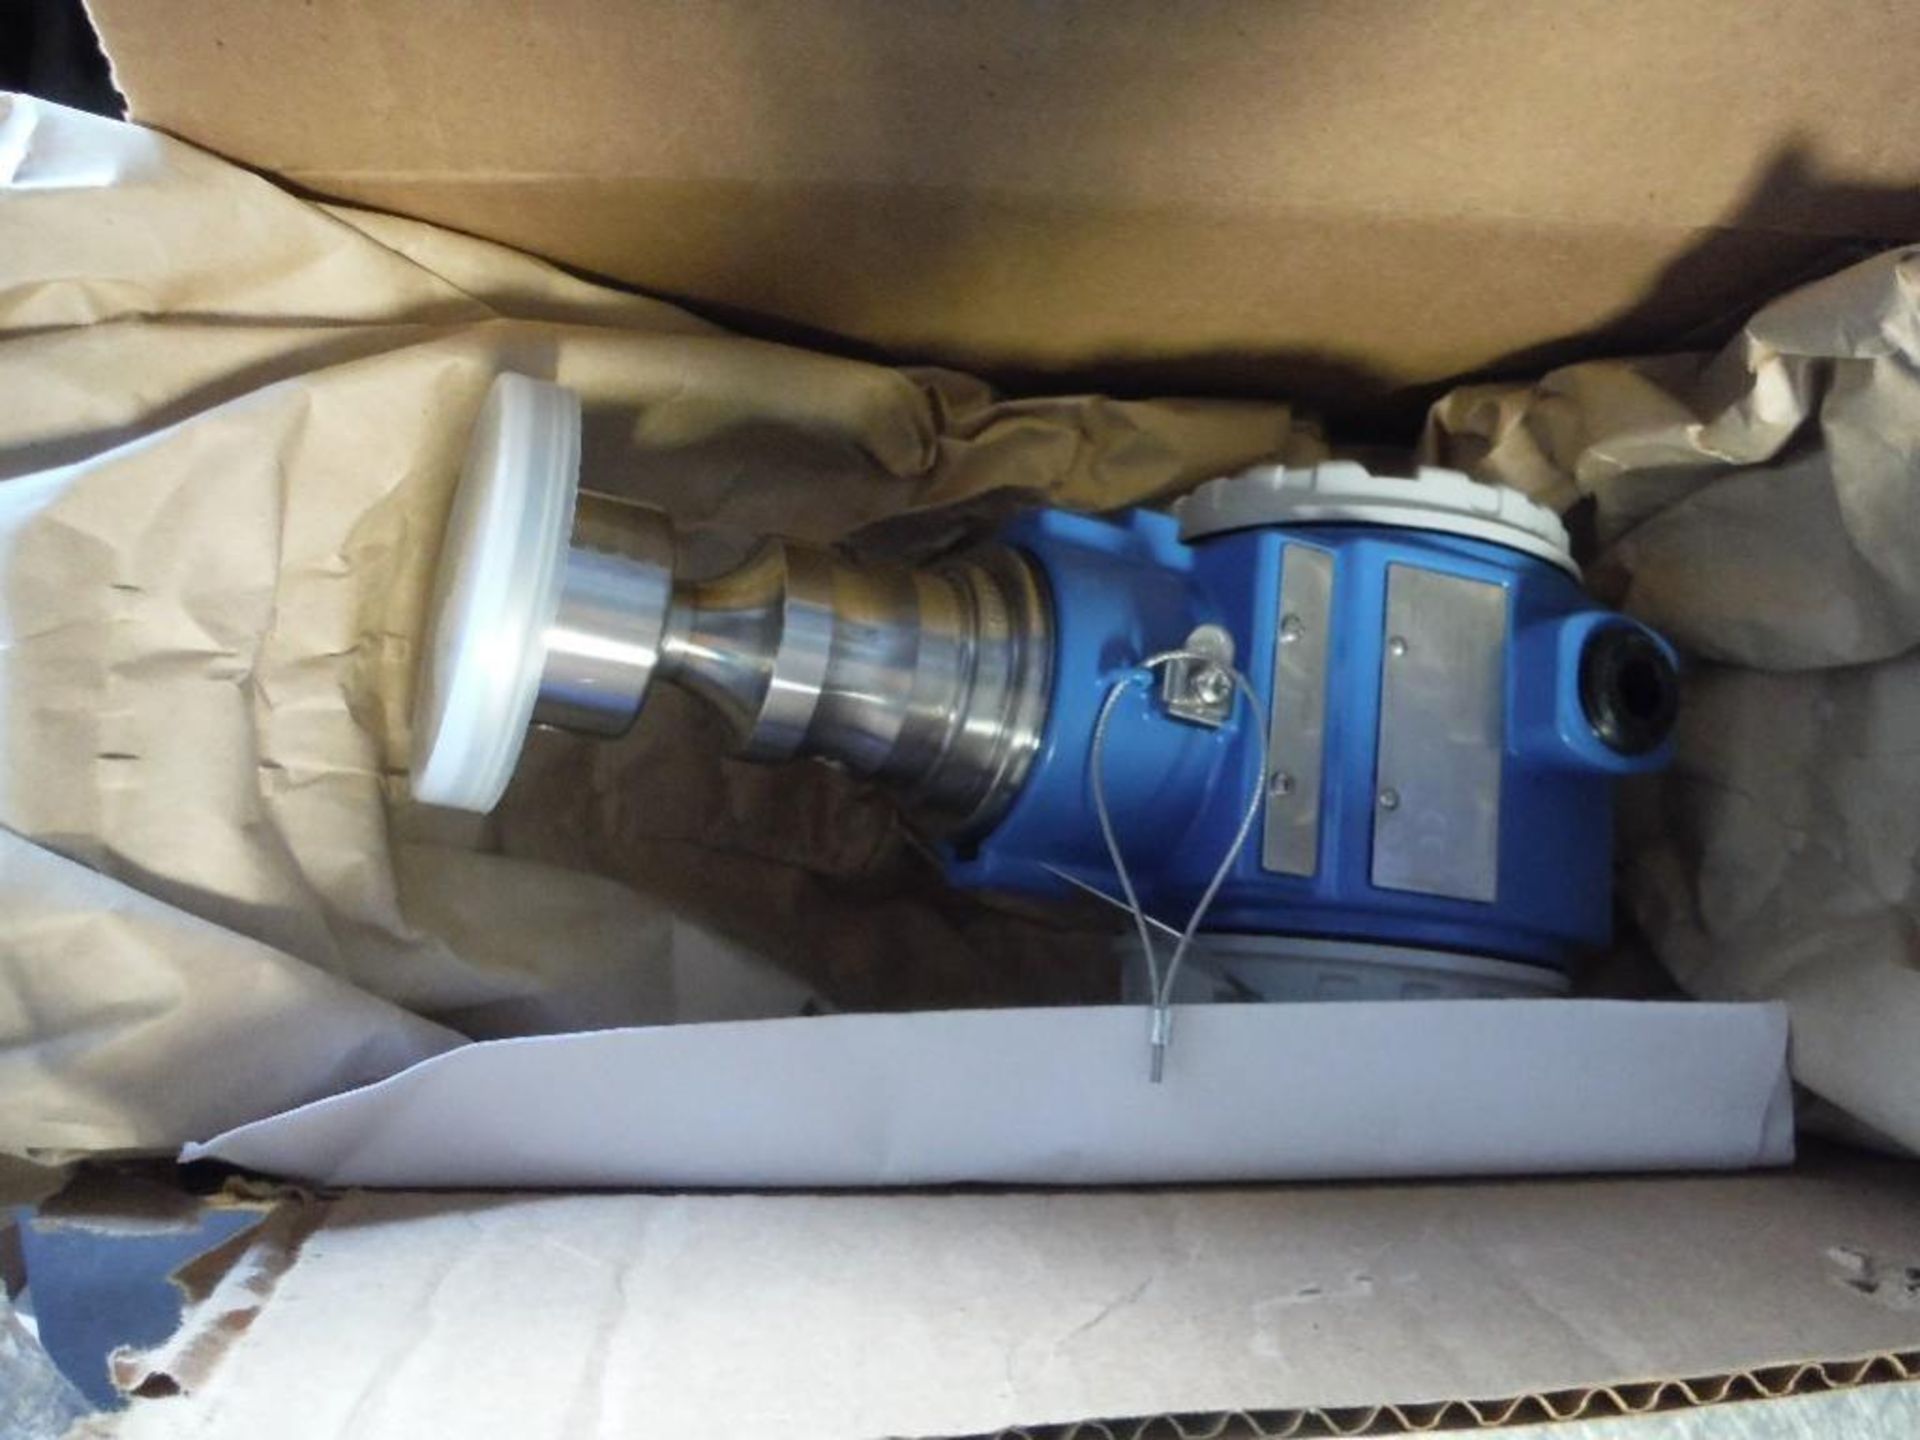 Endress+Hauser pressure transmitter, 2 in., new in box. - RIGGING FEE FOR DOMESTIC TRANSPORT $25